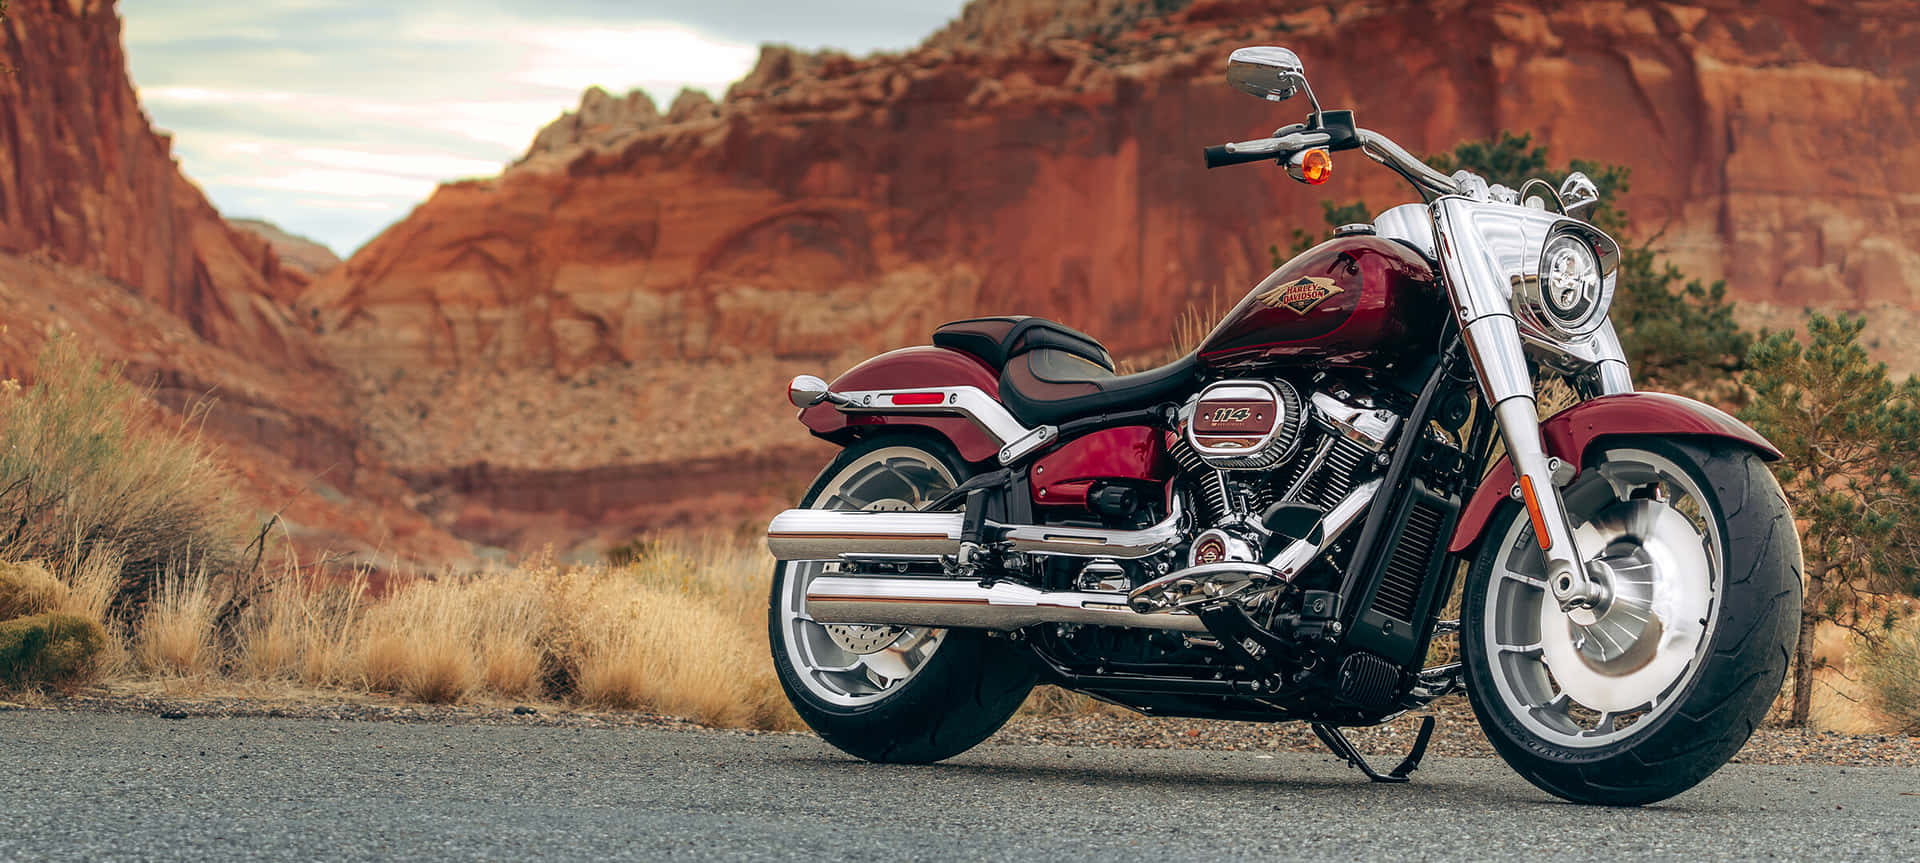 “Take a ride on the wild side with a Harley-Davidson”